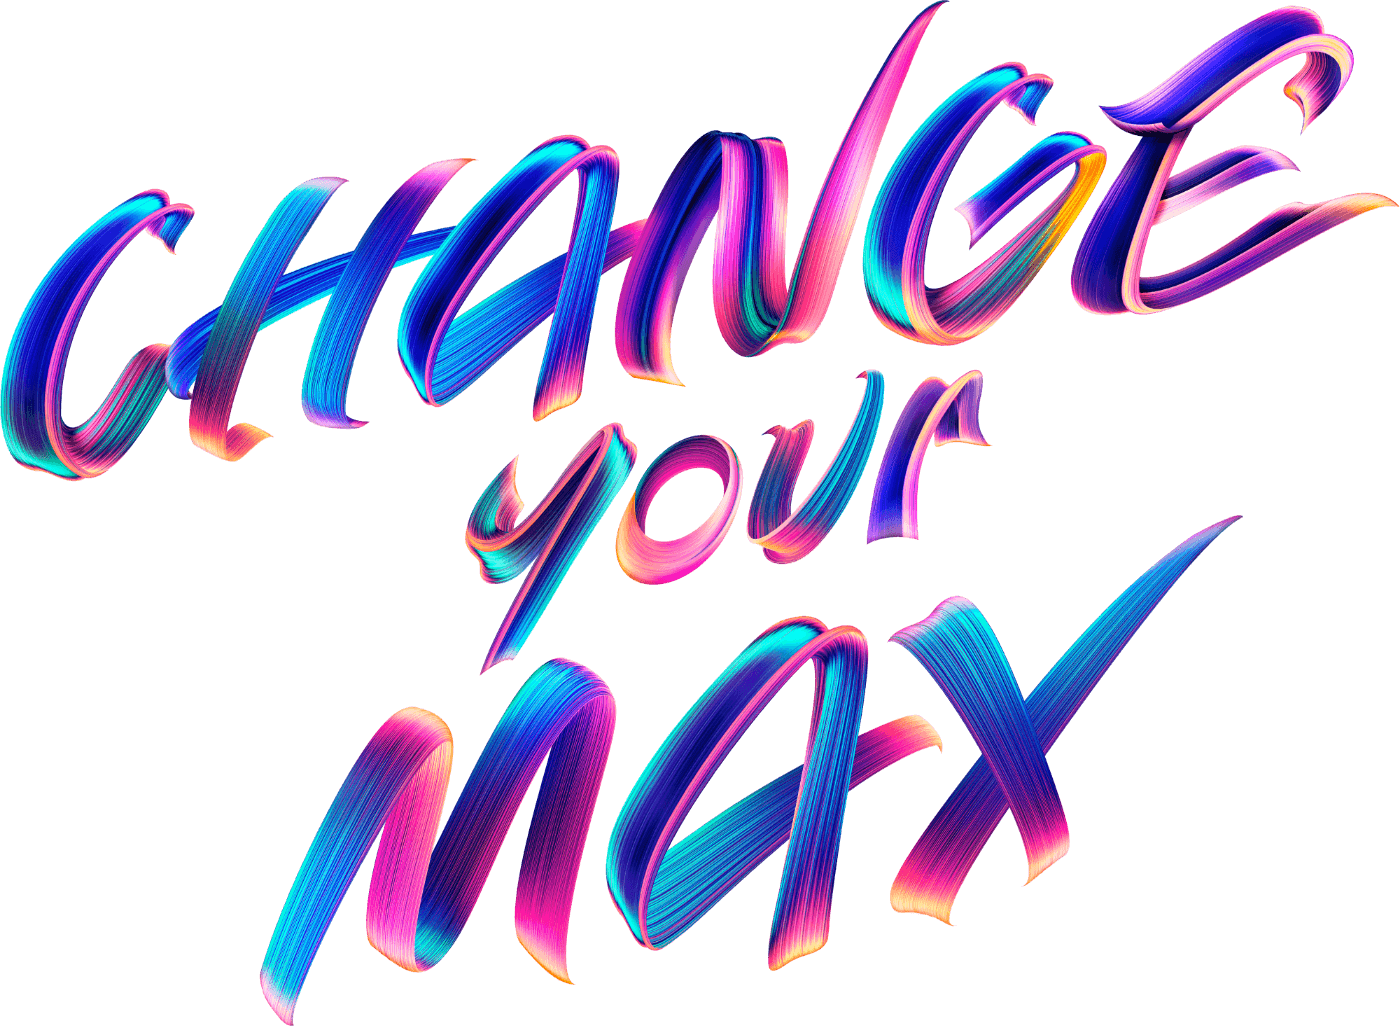 CHANGE your MAX